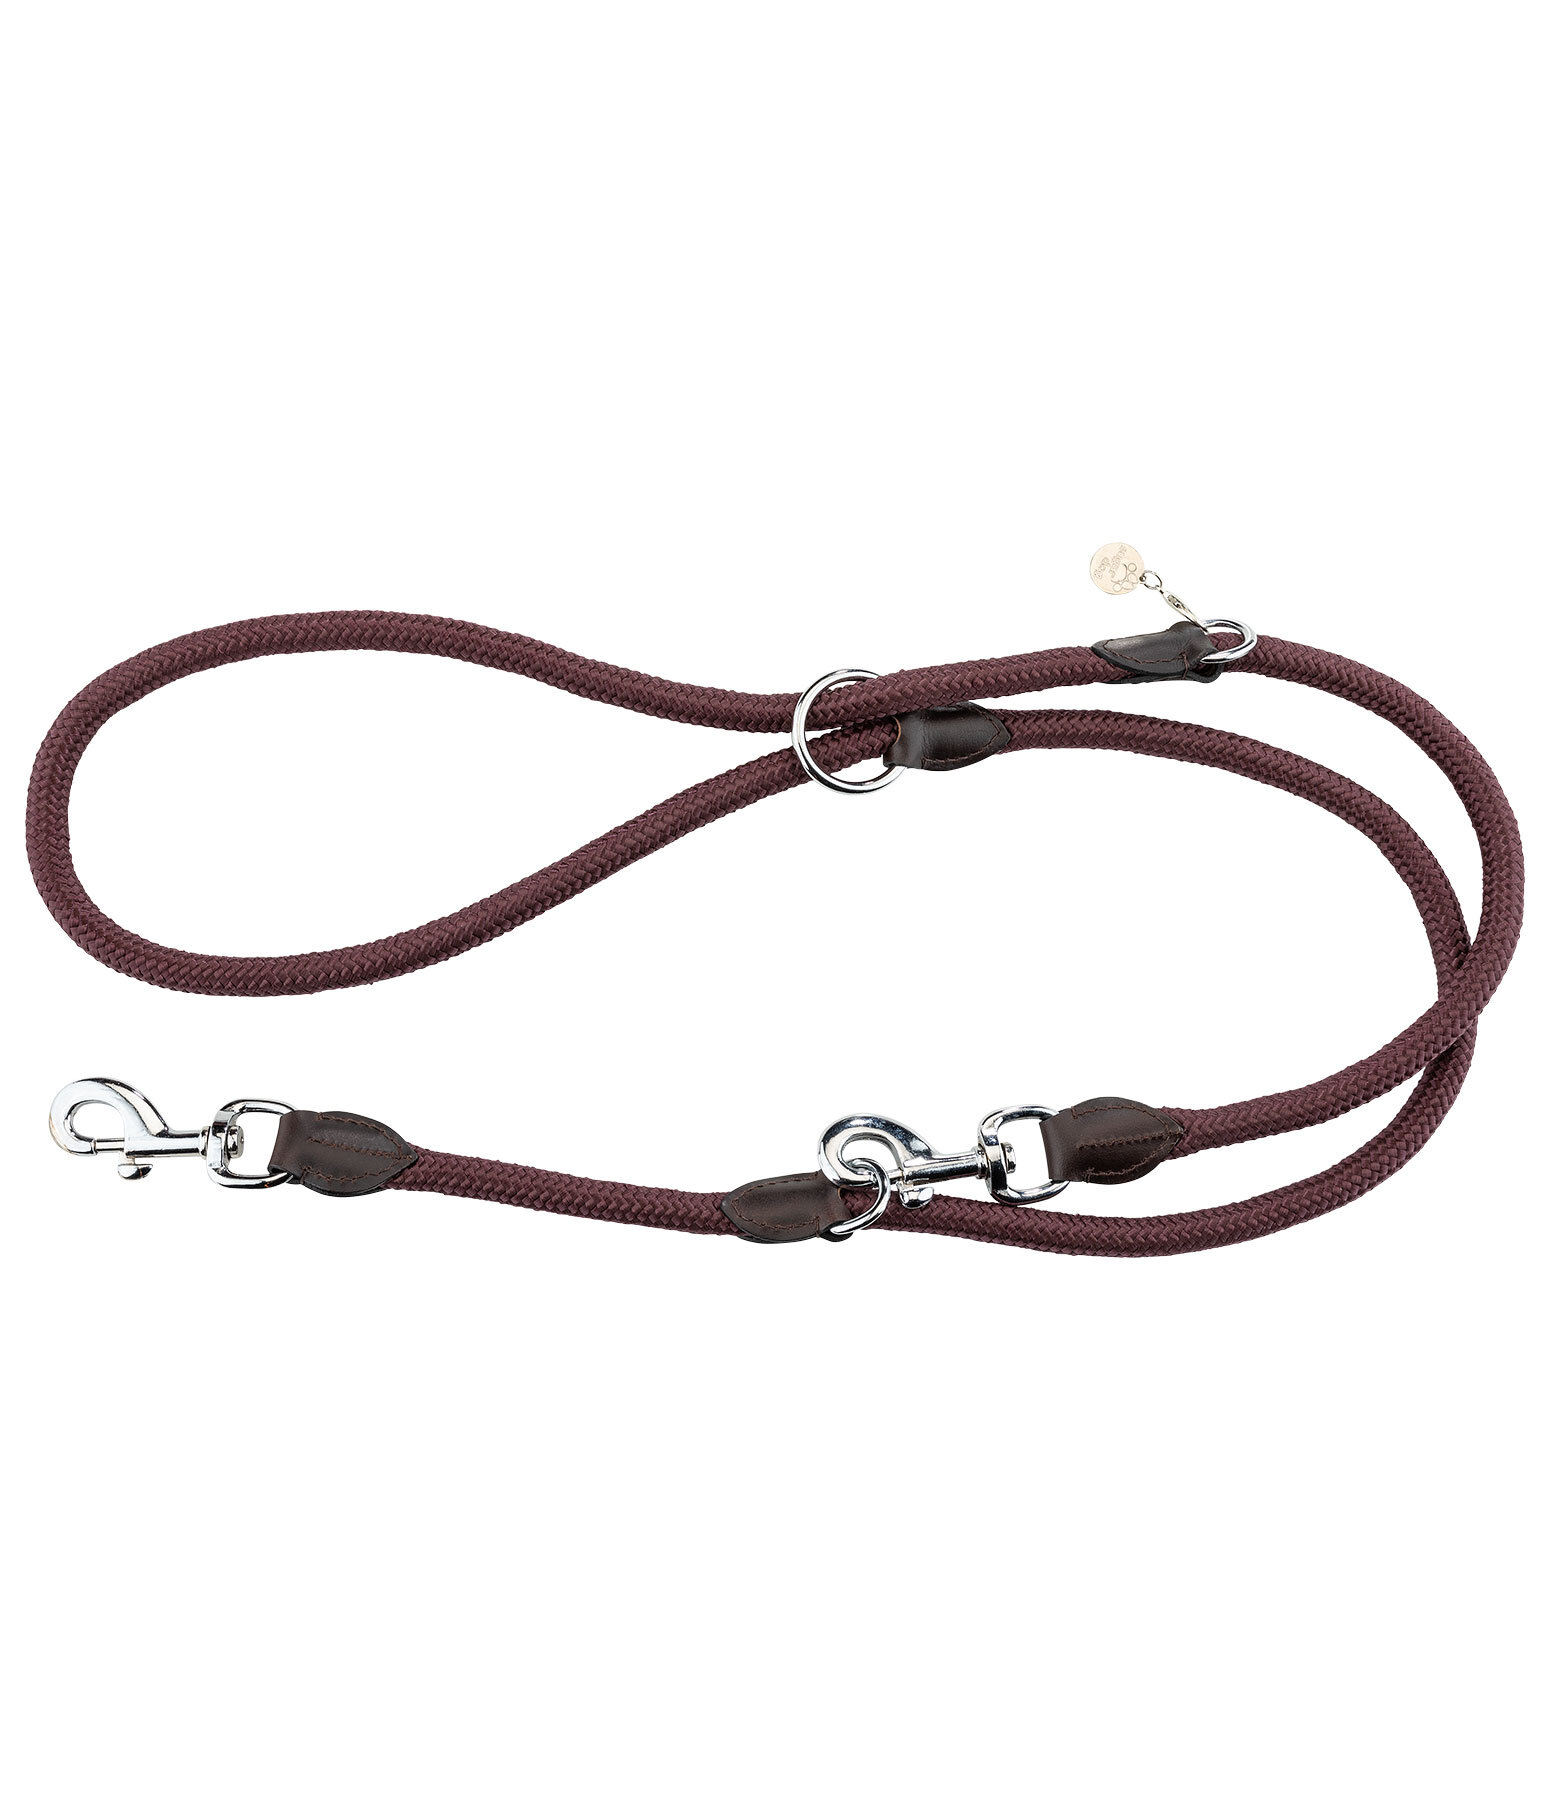 Dog Lead Nature Rope